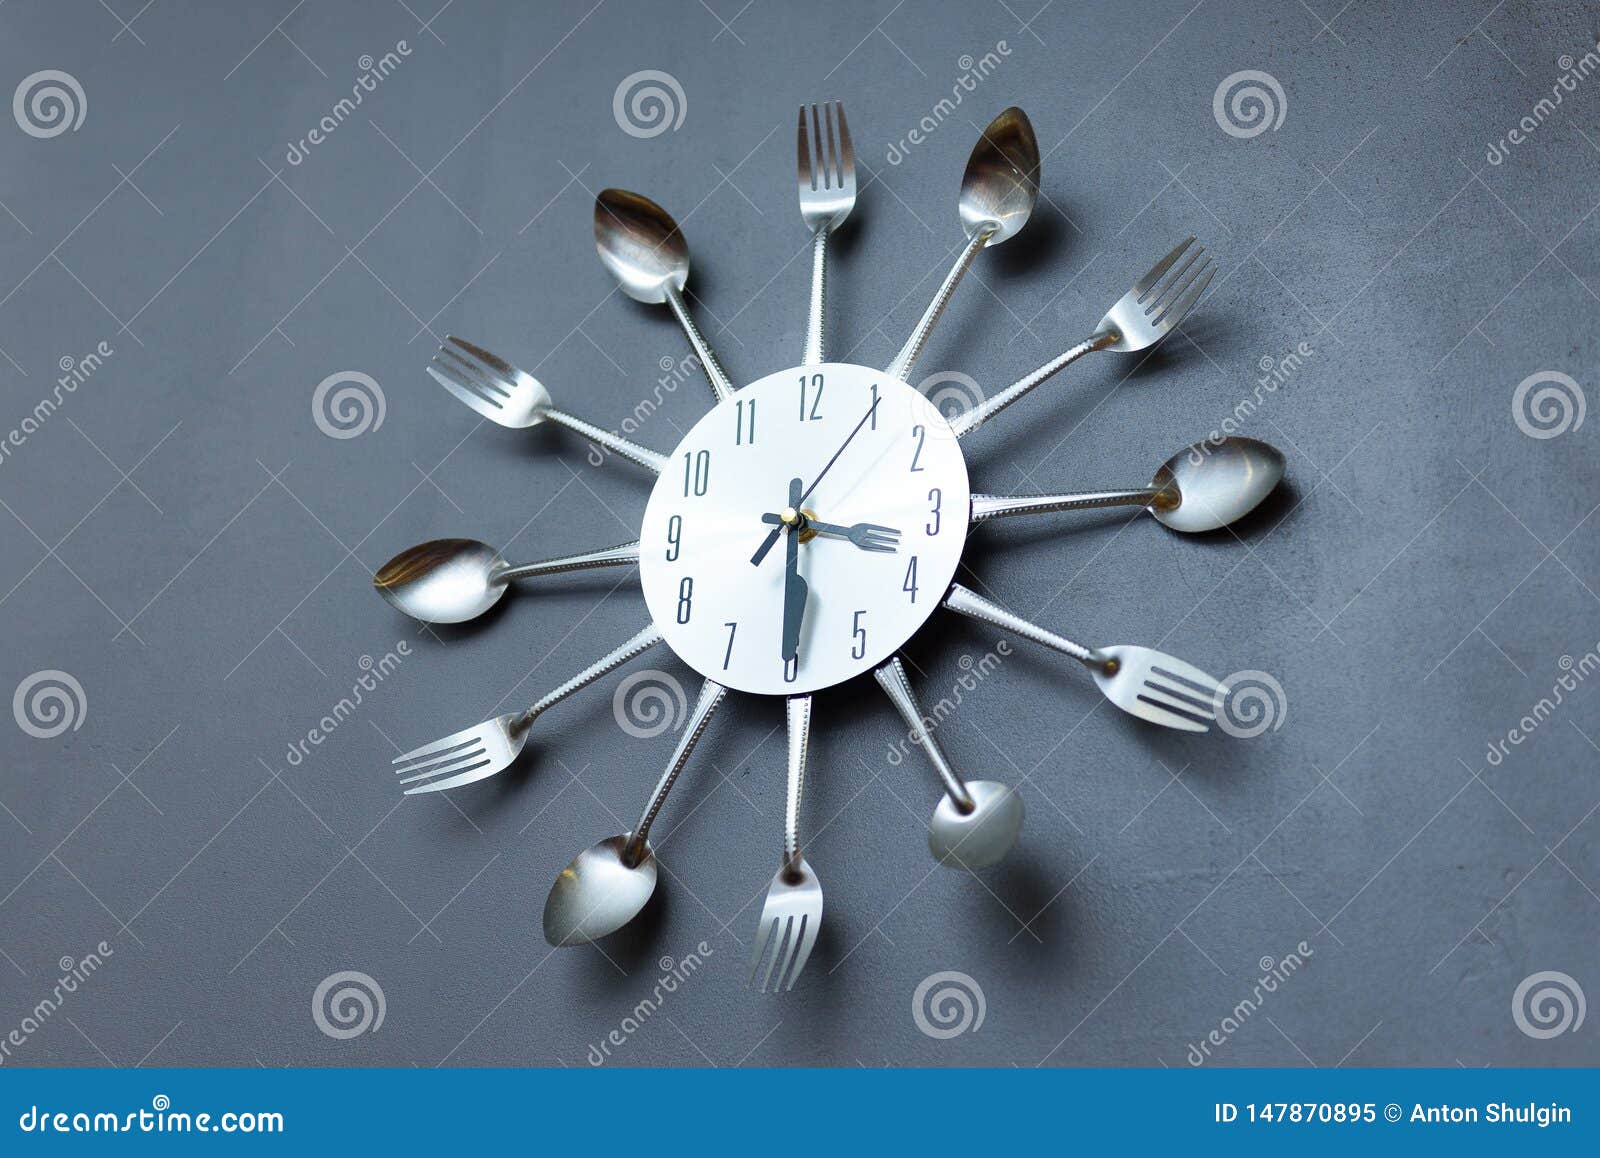 clock in the kitchen, cutlery